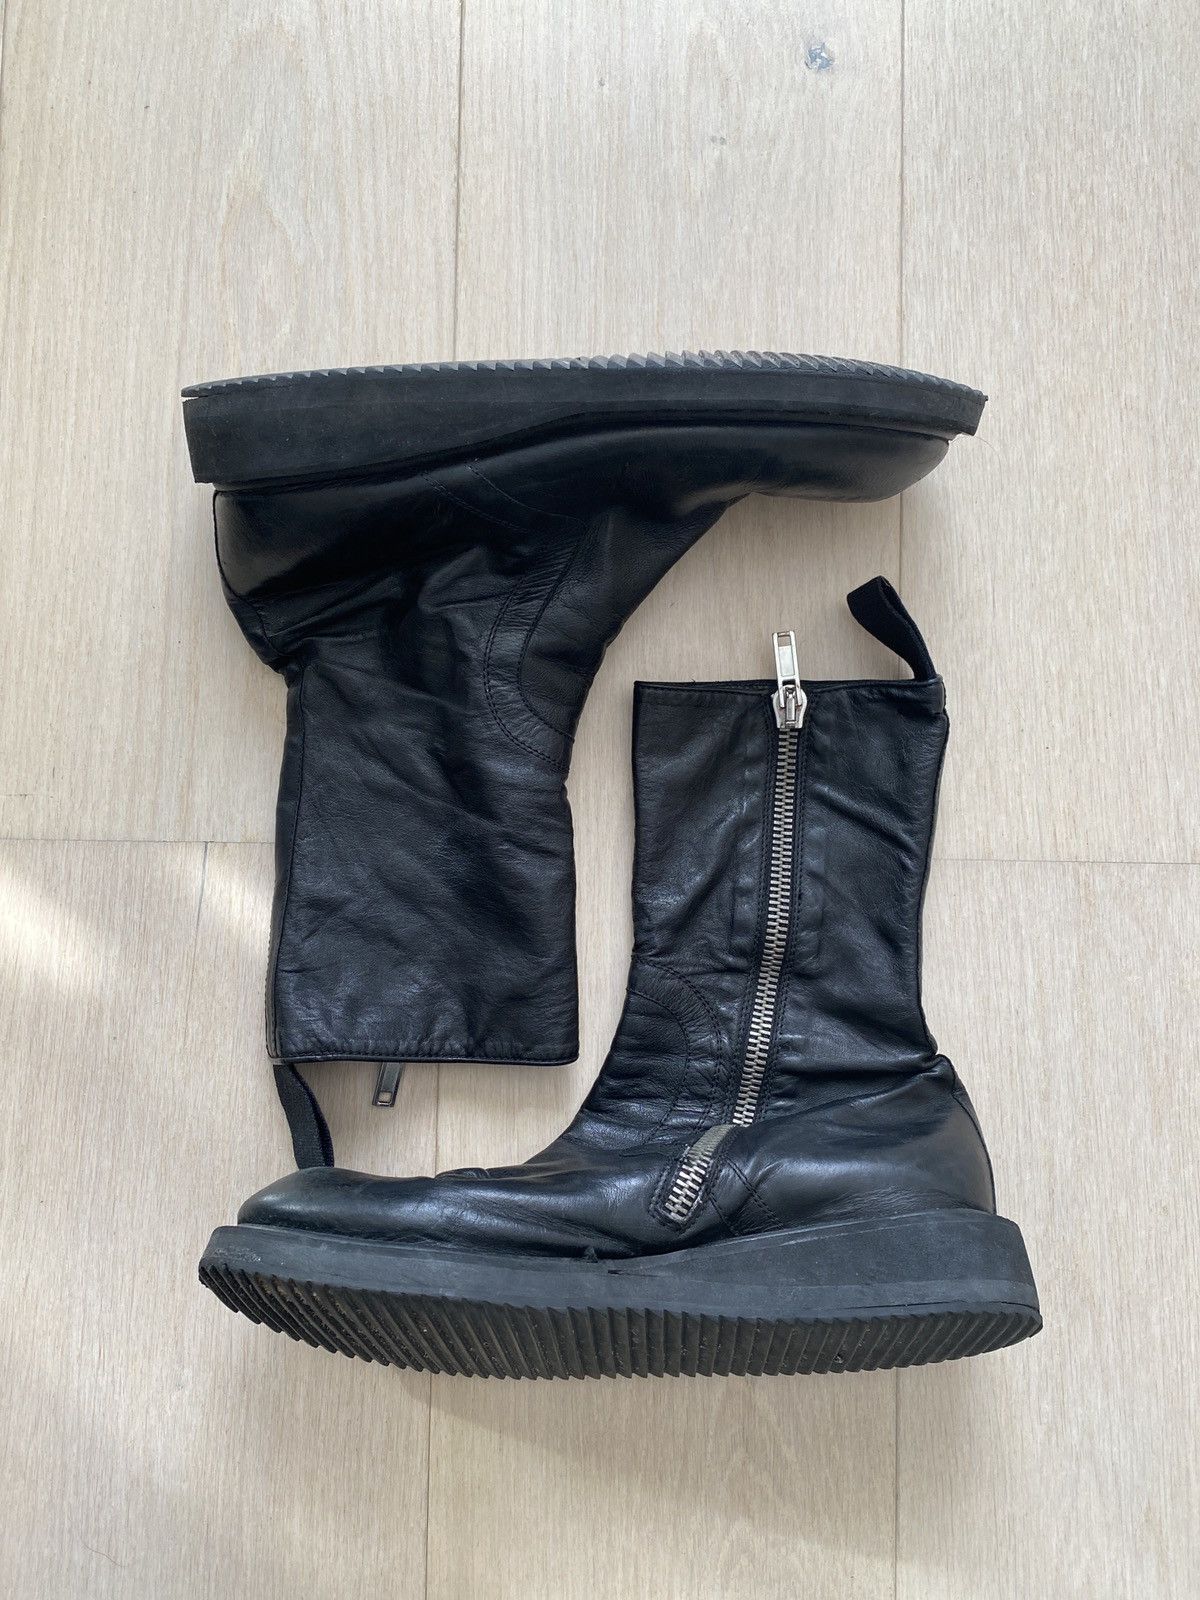 Rick Owens Creeper Boots | Grailed